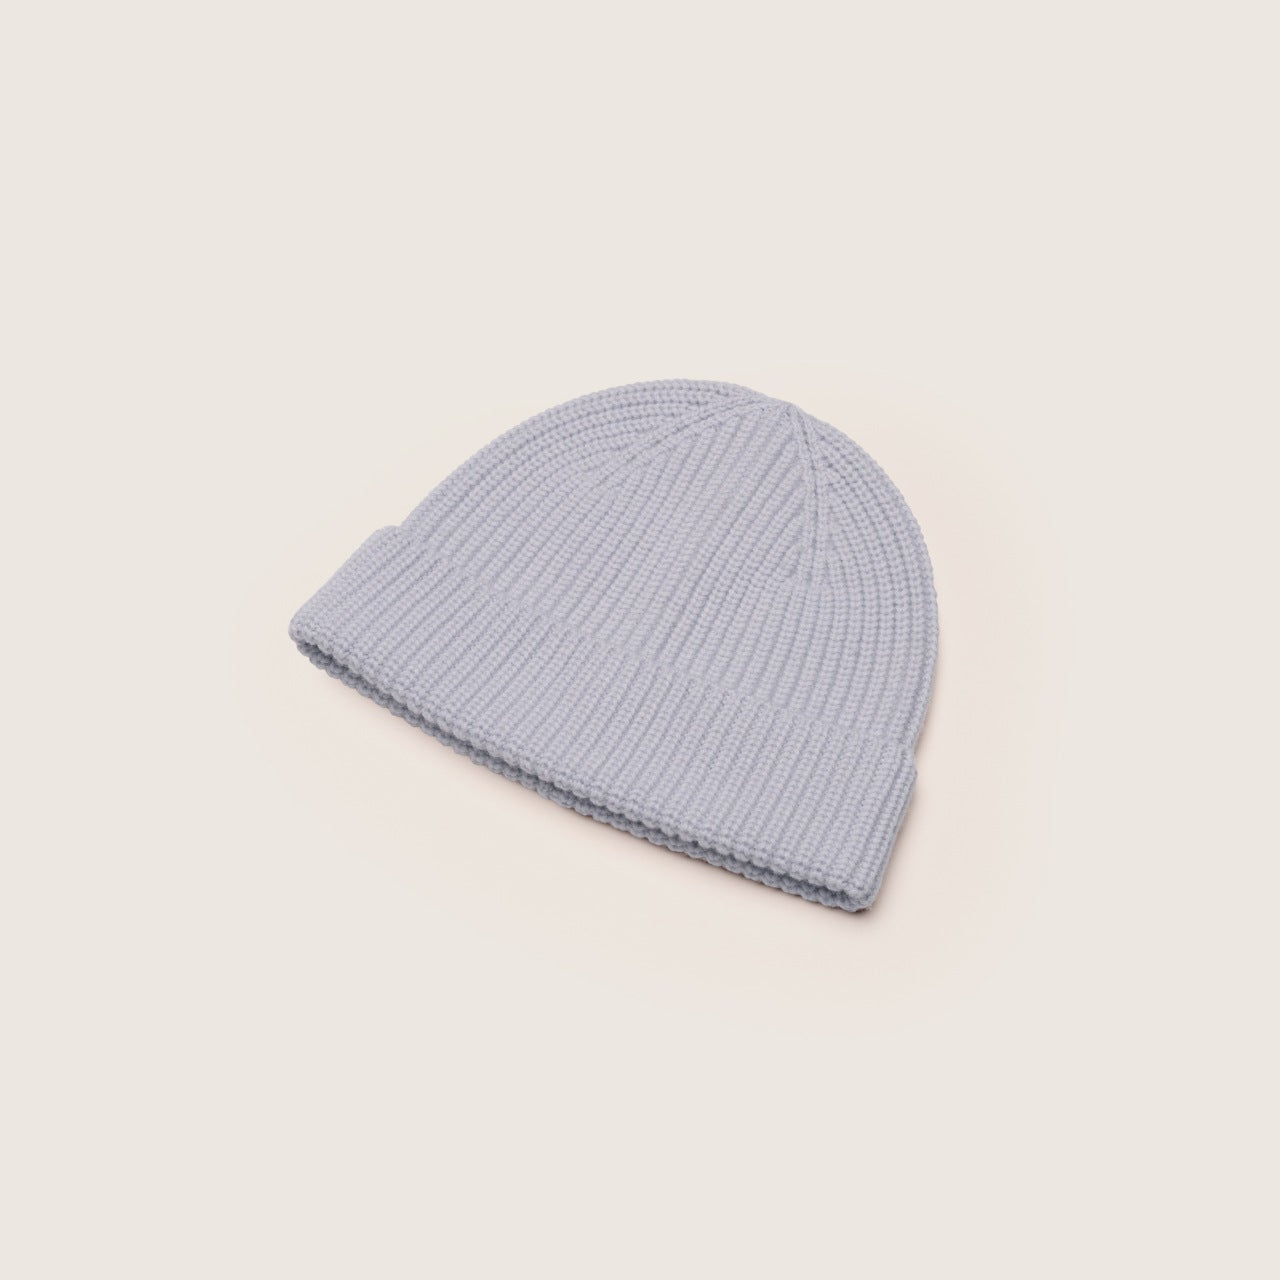 Product image of the Bambi Dust Blue knit beanie